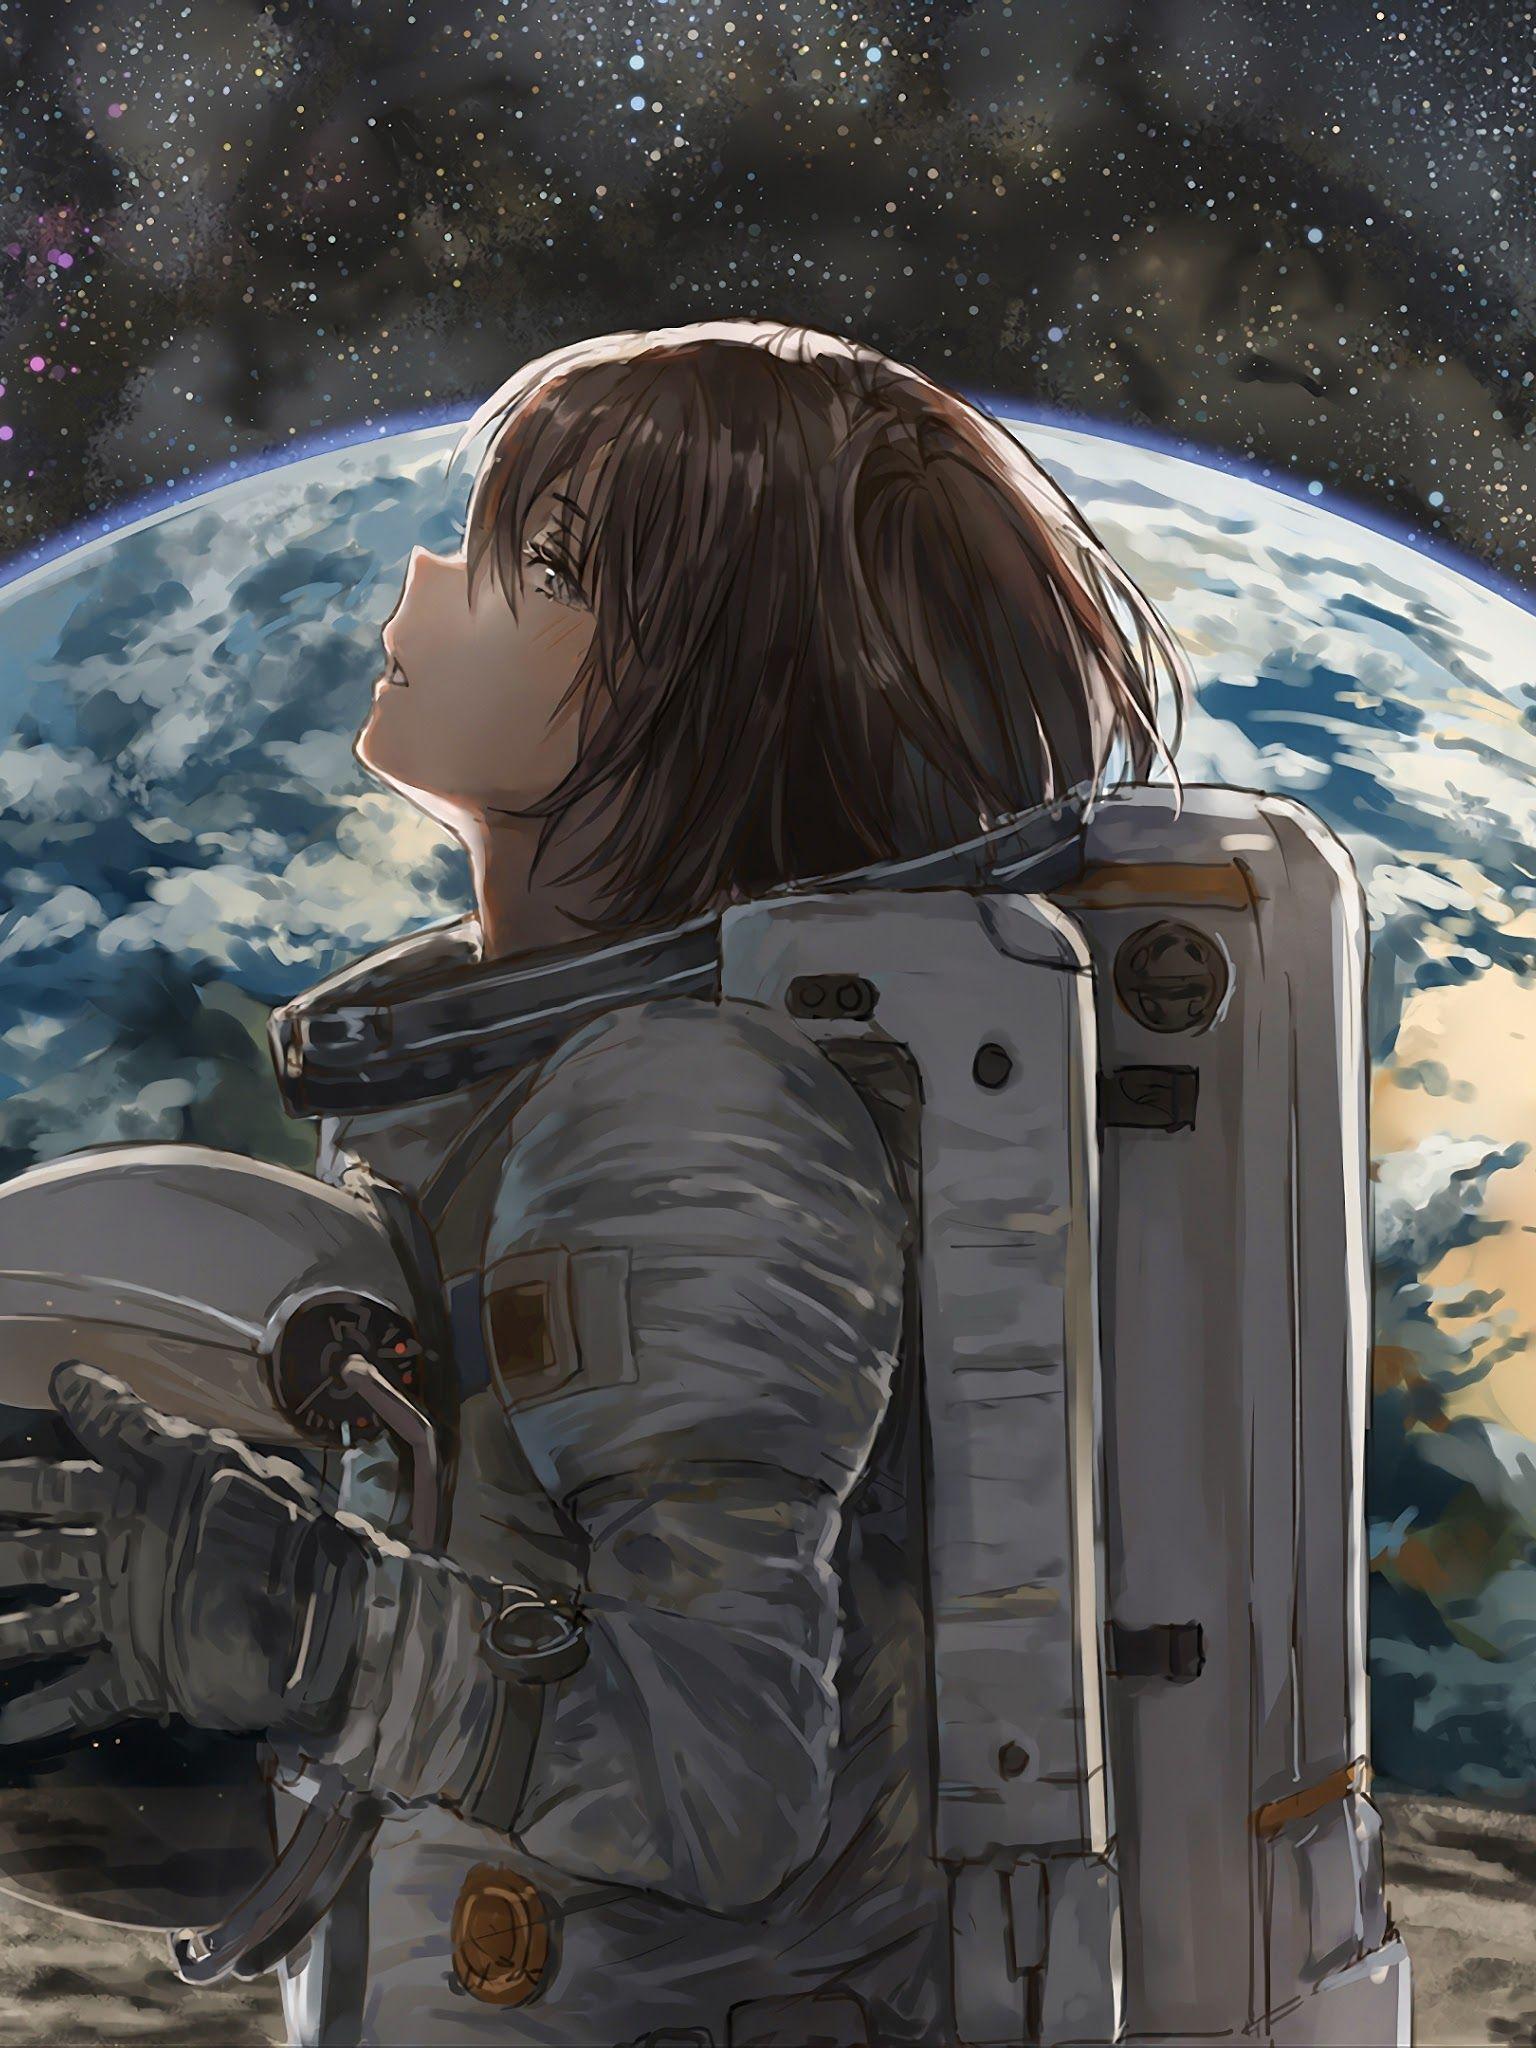 4K Anime Space Wallpapers - Top Free 4K Anime Space Backgrounds